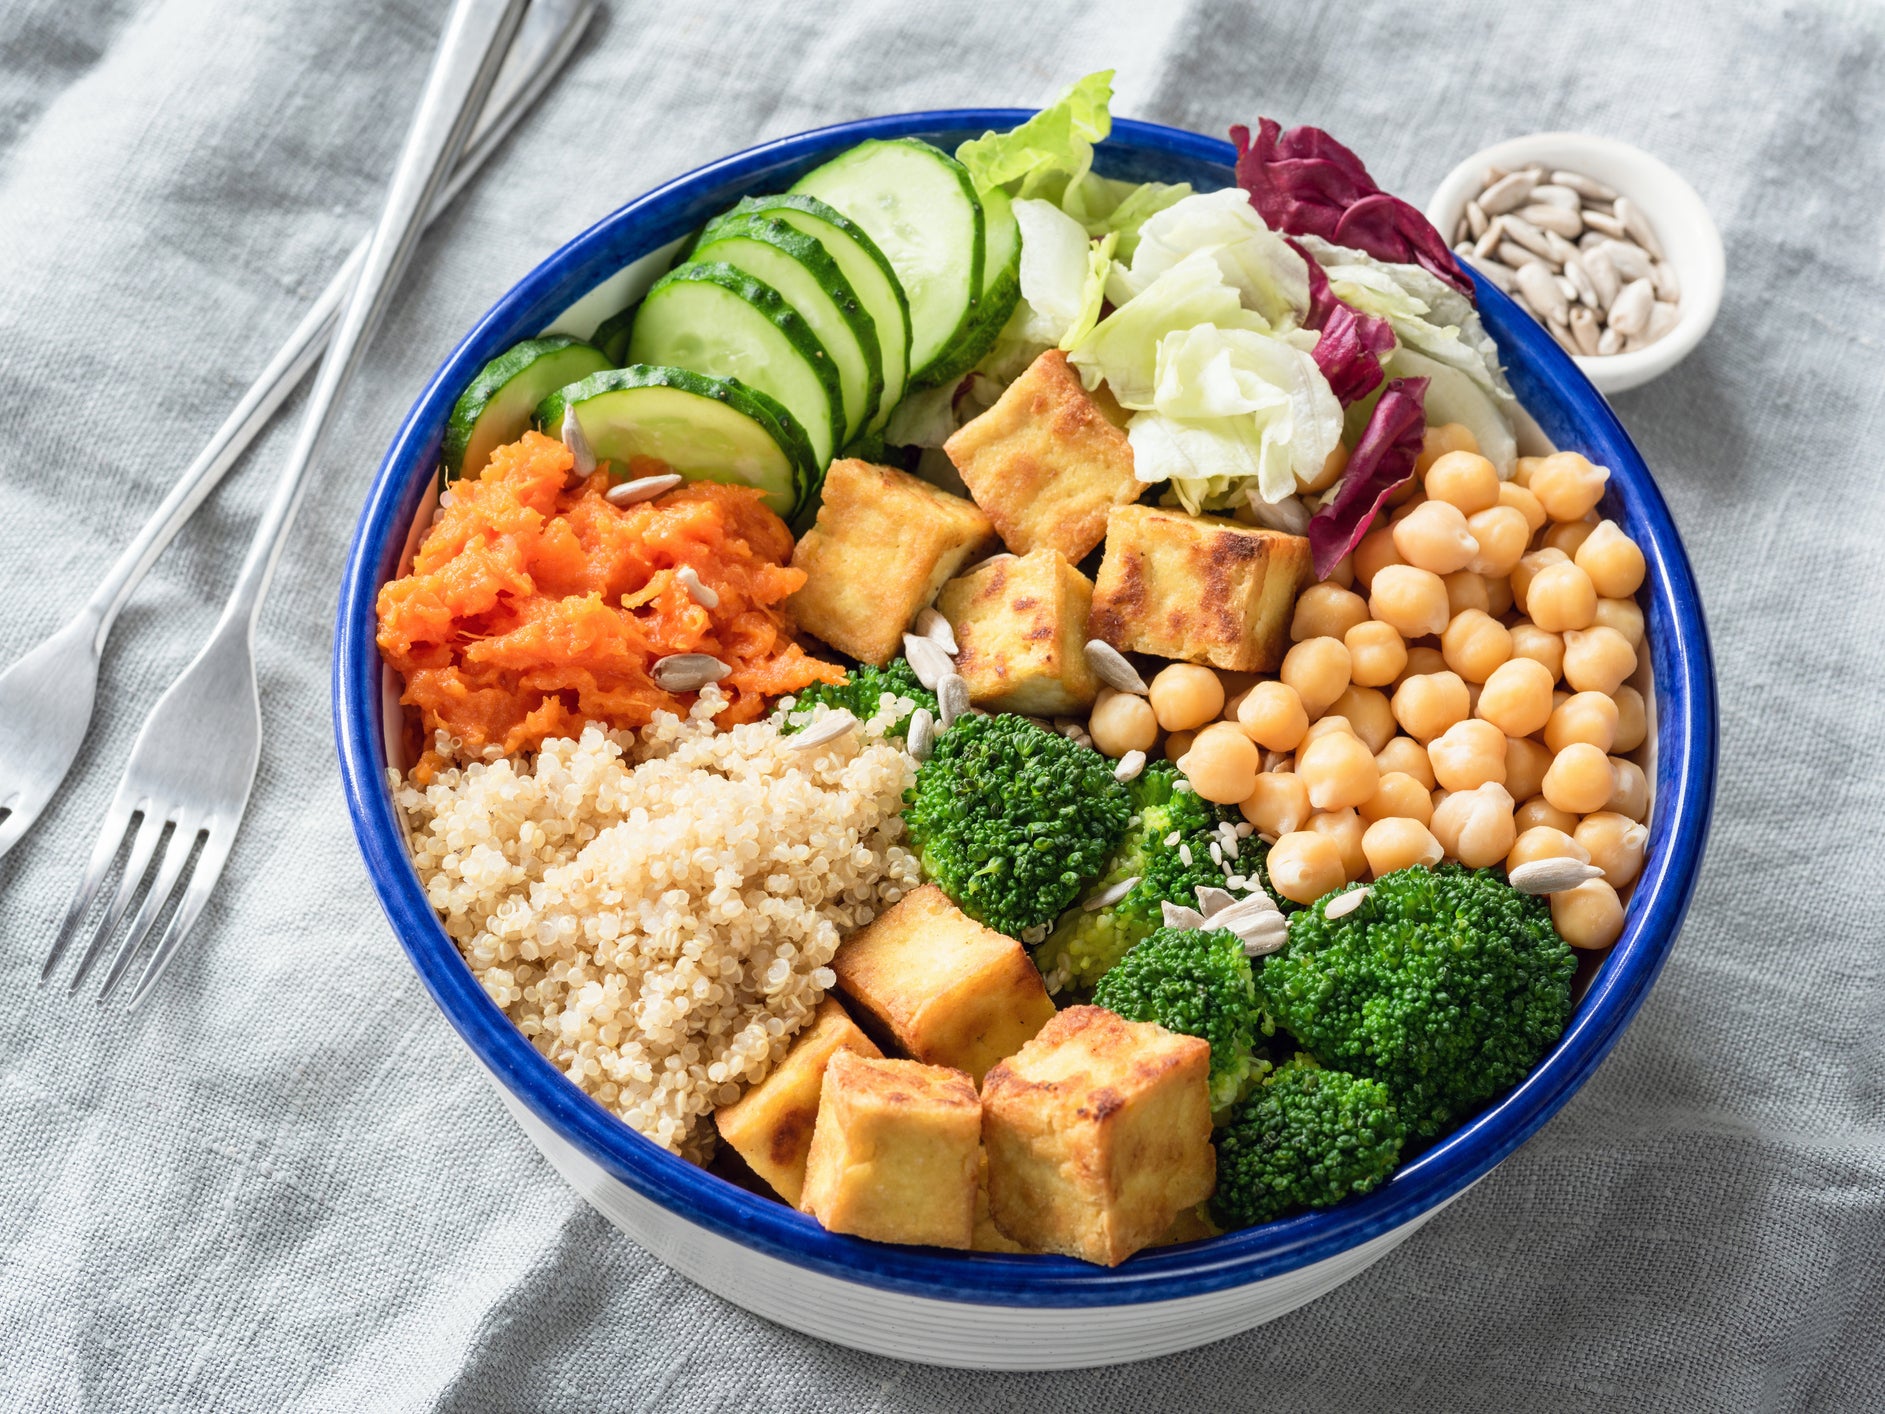 vegetarian food is good for health essay for or against